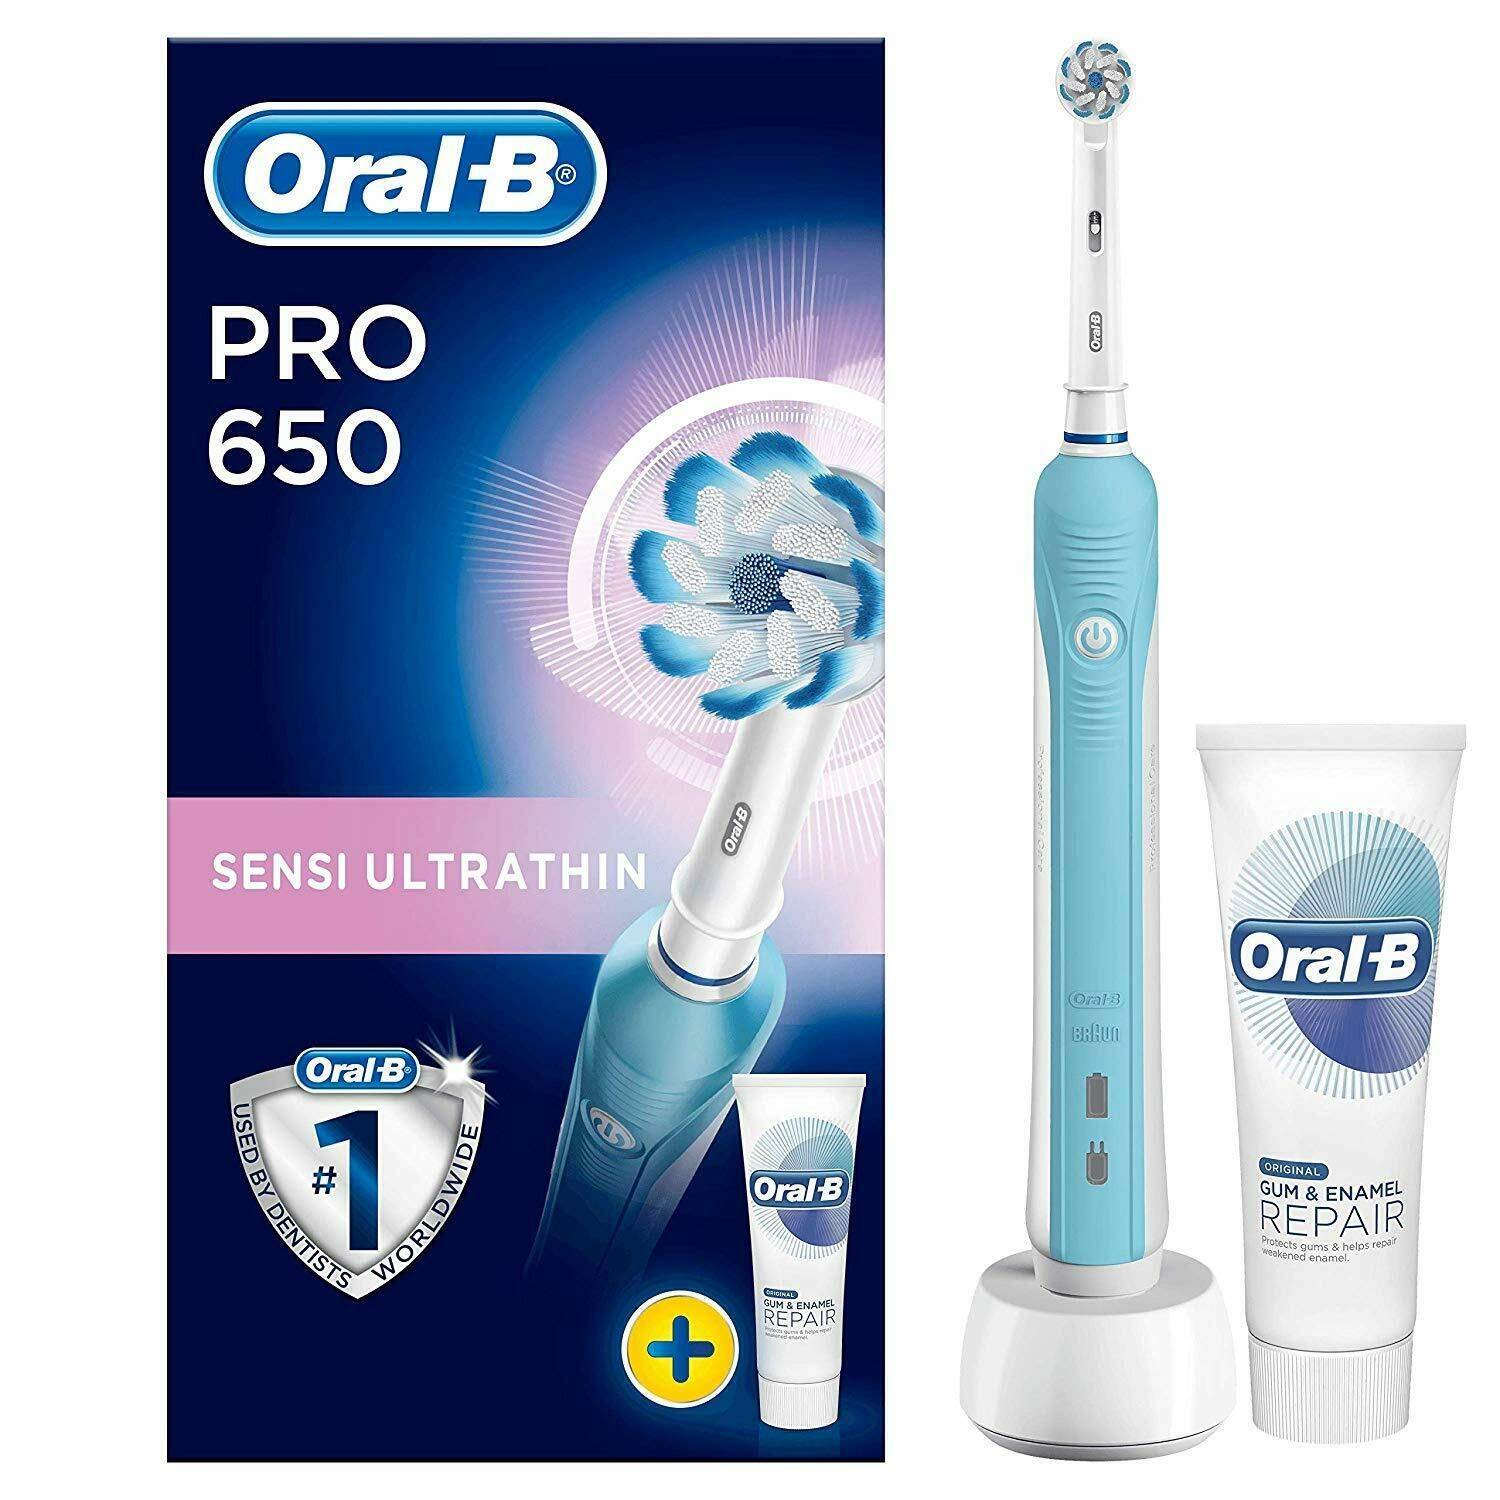 Oral-B Pro 650 Sensi Ultrathin Toothbrush with 1 Toothbrush Head & Toothpaste

Experience Oral-B Pro 650 from the #1 brand recommended by dentist worlwide. The Pro 650 electric toothbrush helps you brush like your dentist recommends for 2 minutes with the professional timer and it notifies you every 30 seconds to change the area your are brushing. While you are just moving the brush around your mouth, Oral-B's unique round head does all the rest. It removes up to 100 percent more plaque than a standard manual toothbrush for healthier gums and it starts making your smile whiter as of the first day of brushing by removing surface stains. With the professional timer Oral-B Pro 650 is a great toothbrush for everyone who wants to switch to an electric toothbrush. No wonder Oral-B is the #1 recommended brand by dentists worldwide.This pack includes 1 bonus Oral-B Gum and Enamel Repair Original Toothpaste. Compatible with the following replacement toothbrush heads: Cross Action, 3D White, Sensi Ultrathin, Sensitive Clean, Precision Clean, Floss Action, Tri Zone, Dual Clean, Power Tip, Ortho Care.

    Up to 100 percent more plaque removal: round head cleans better for healthier gums.
    Dynamic movement helps you achieve enhanced cleaning results.
    Dentist-inspired round brush head oscillates, rotates and pulsates to break up and remove plaque.
    Know you brush the right amount of time with the 2 min professional timer.
    Oral-B, the #1 brand used by dentists worldwide.


Round cleans better
Oral-B's round head contours to each tooth for cleaner teeth and healthier gums versus a standard manual toothbrush.

Brush for the right amount of time
The built-in timer helps you brush for at least two minutes, the minimum brushing time dentists and hygienists recommend.

10 days of brushing with one charge
The Oral-B PRO 600 has a state of the art battery to last 10 days. This way you don't need to worry about getting your charger during your holidays.

Brush heads designed with dentists
Oral-B Refills are designed to perfectly fit your toothbrush and come with specialised features for amazing results like end rounding to be gentle on gums, angled bristles to clean in-between teeth, and UltraThin bristles for extra gentle cleaning.

Number one dentist recommended*
Oral-B is not only designed with dentists, it is also the number one toothbrush brand recommended by dentists worldwide. Discover for yourself the next level of oral care by Oral-B.

*based on surveys from 2014 of a representative worldwide sample of dentists carried out for P&G regularly

Box Contains : 

    1x Oral-B Pro 650 Electric Toothbrush, UK 2-Pin Plug, 
    1x Toothbrush Head,
    1x Oral-B Gum & Enamel Repair Original Toothpaste


Not Available for the following postcodes:
AB, BT, DB99, DD9-11, EH35-46, FK18-21, AB, BT, DB99, GY, HS, IM, IV, KA27, KA28, KW, KY9-16, PA, PH, PO30-41, TD, TR21-25, ZE